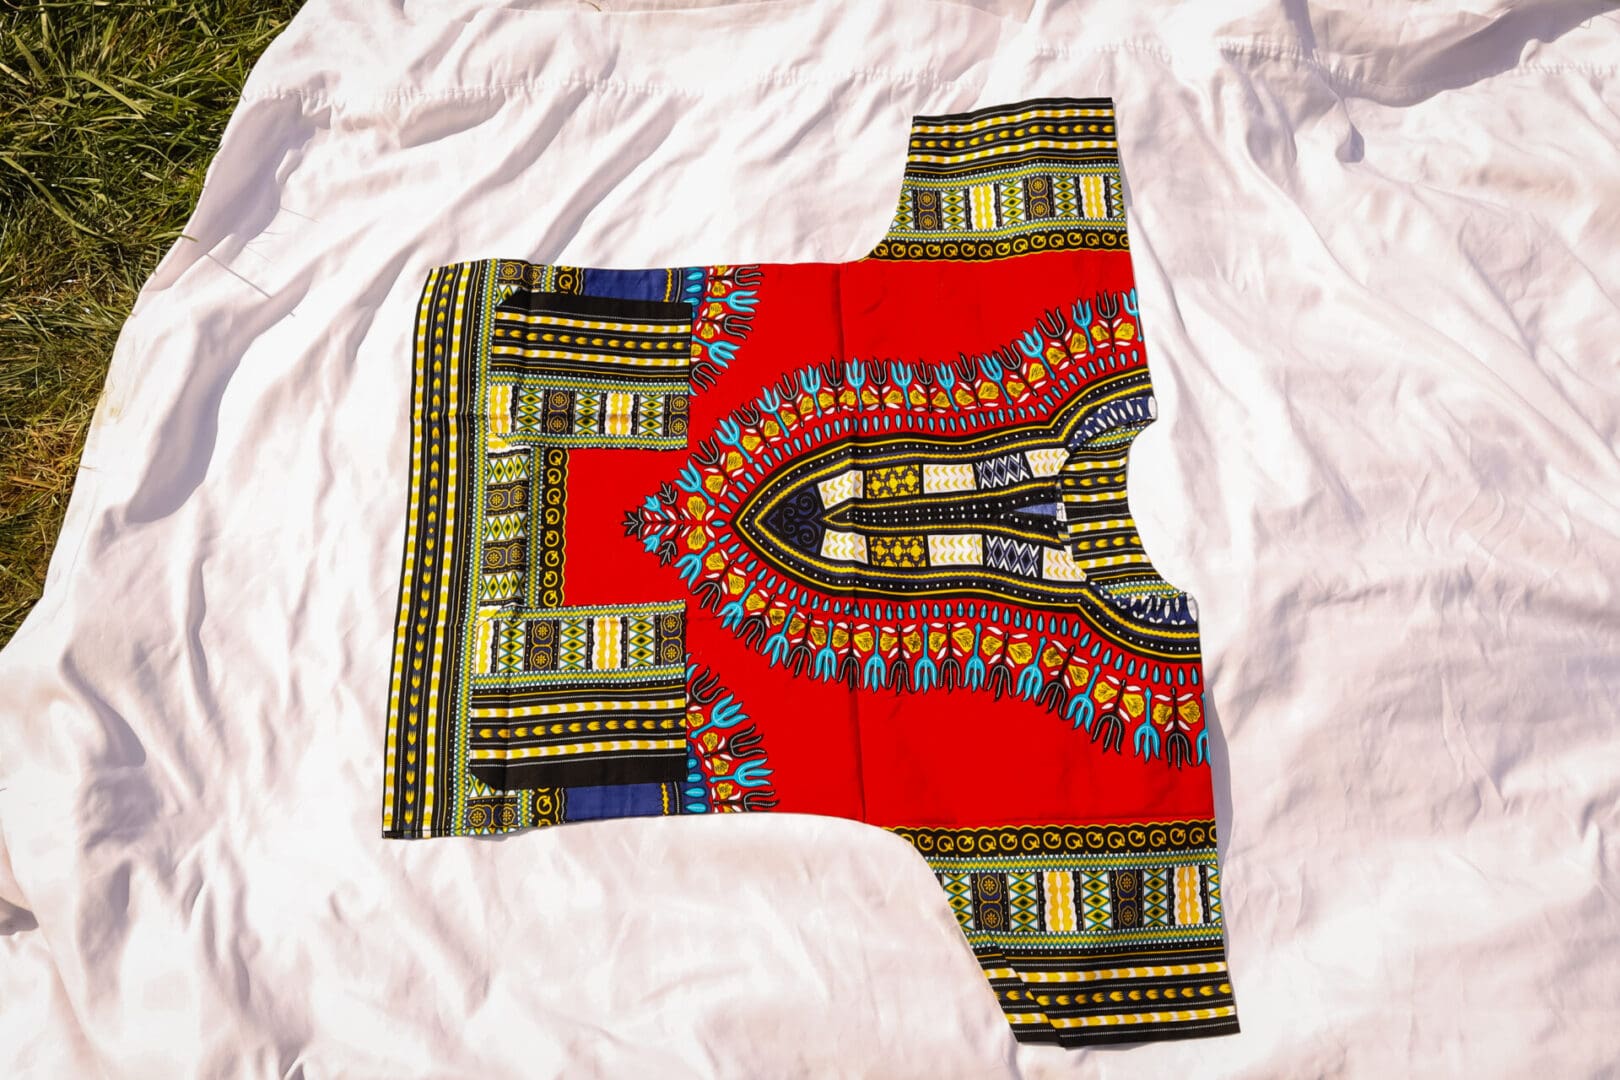 A red and yellow shirt with an african print.